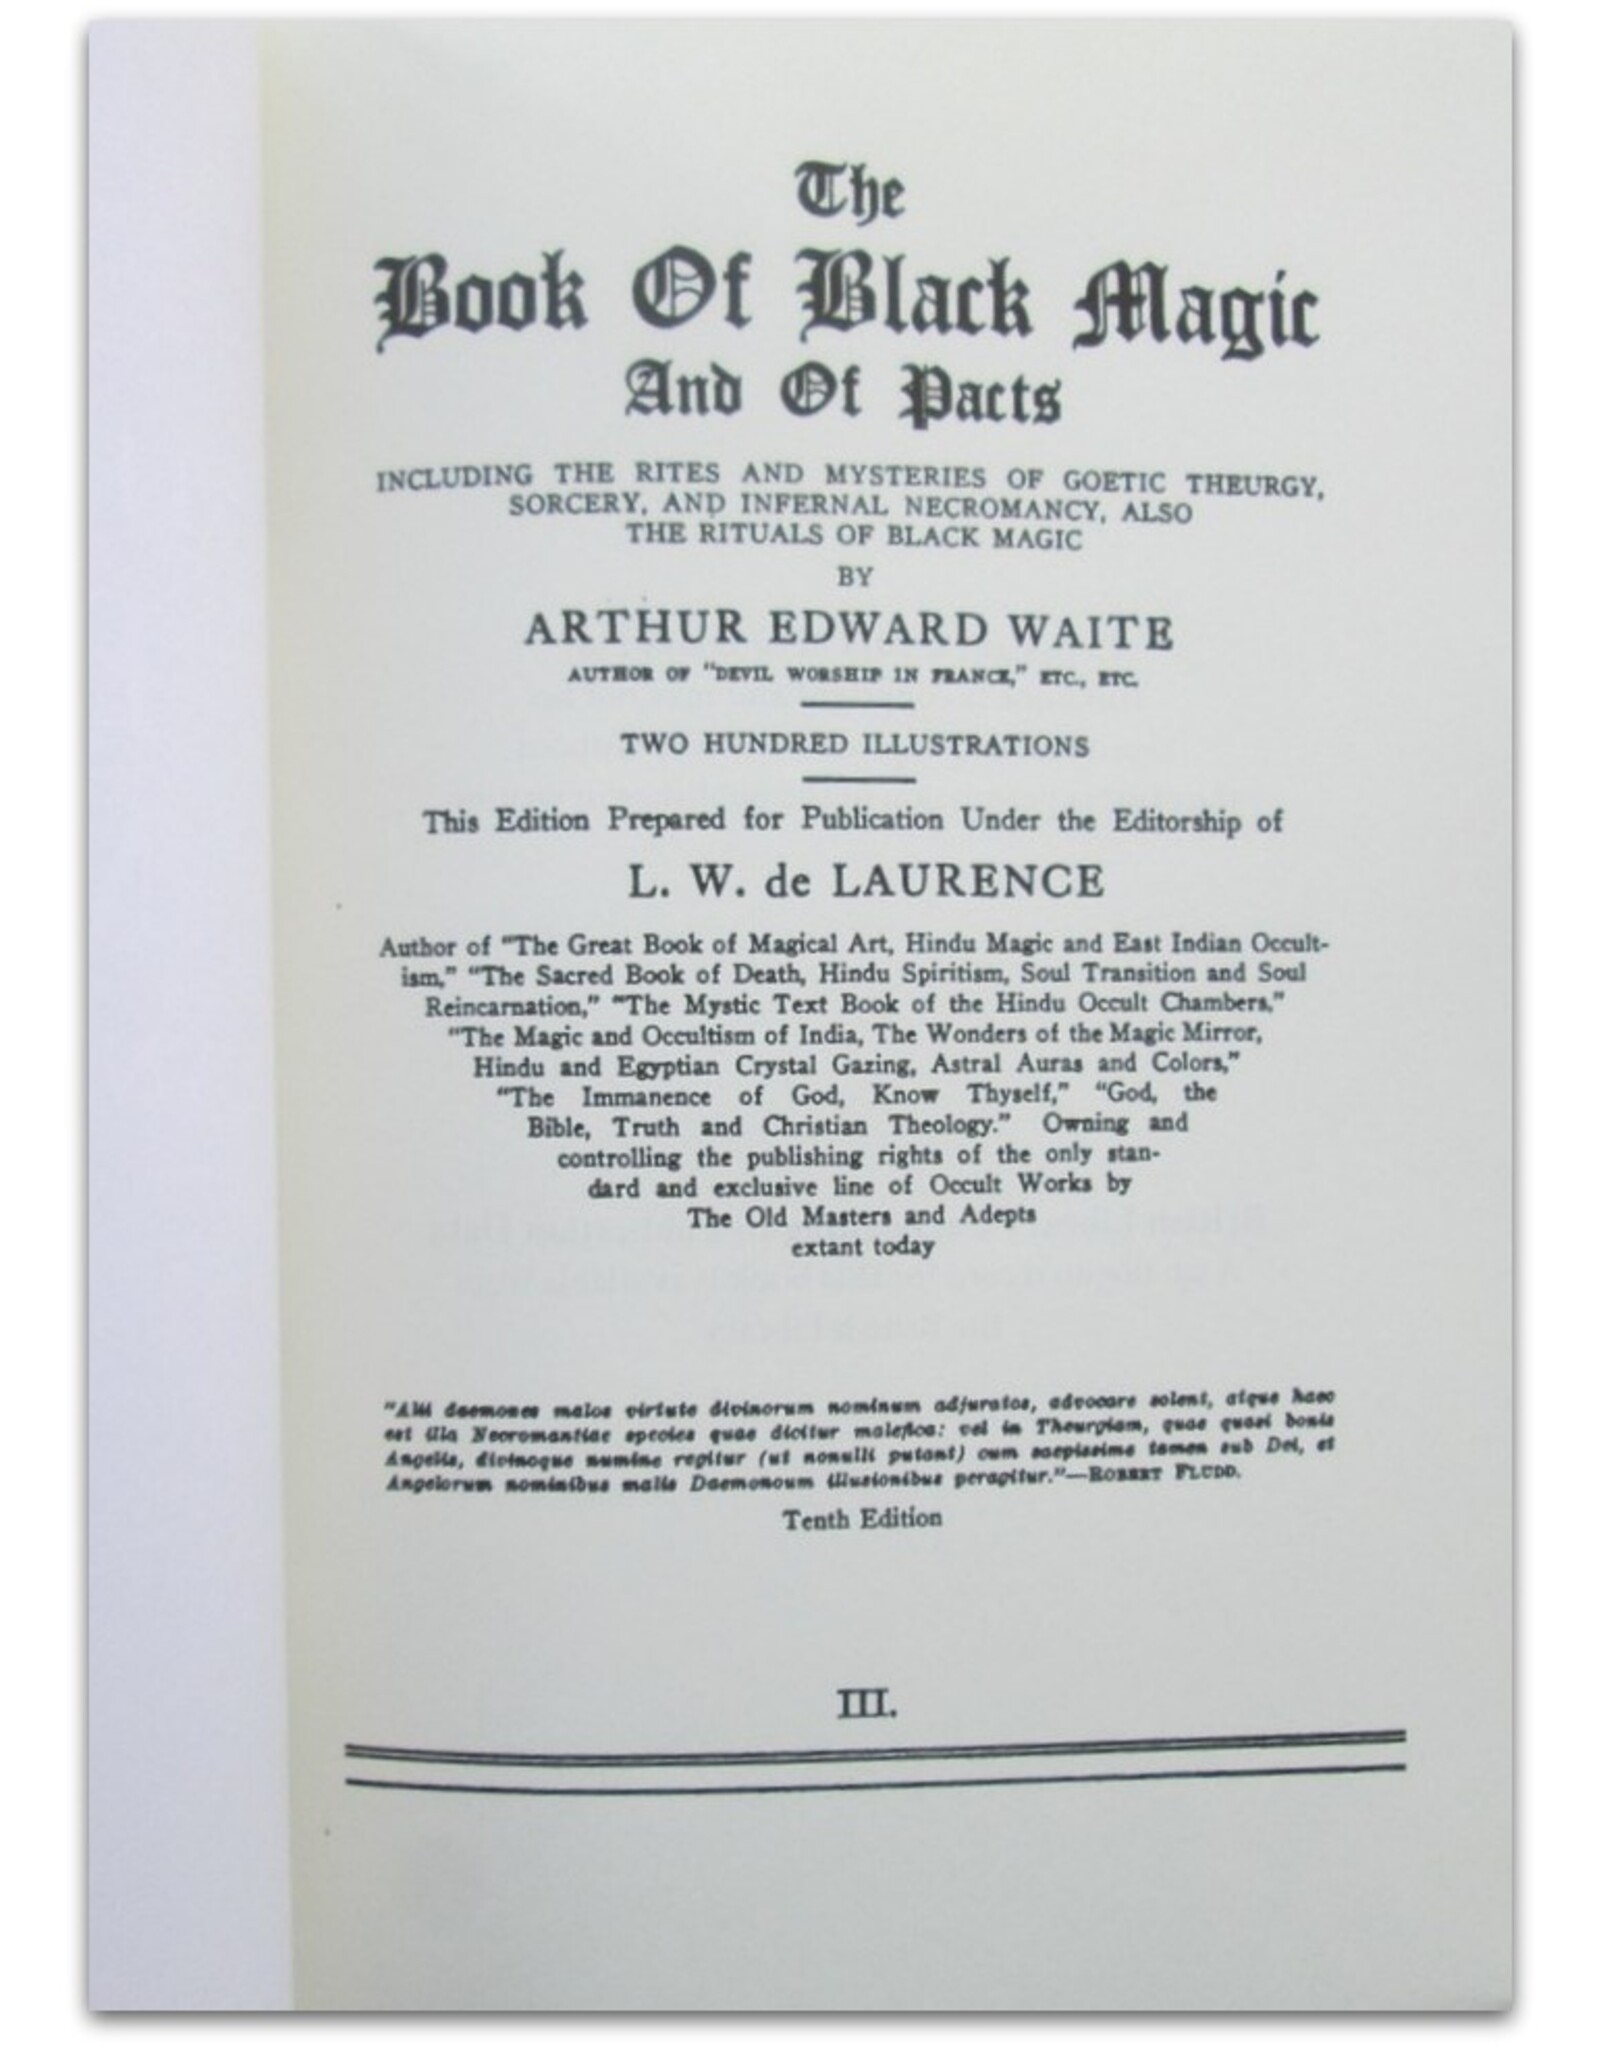 Arthur Edward Waite - The Book of Black Magic And Of Pacts. Including the Rites and Mysteries of Goetic Theurgy, Sorcery and Infernal Necromancy. Prepared for Publication under the Editorship of L.W. de Laurence. [Tenth edition]